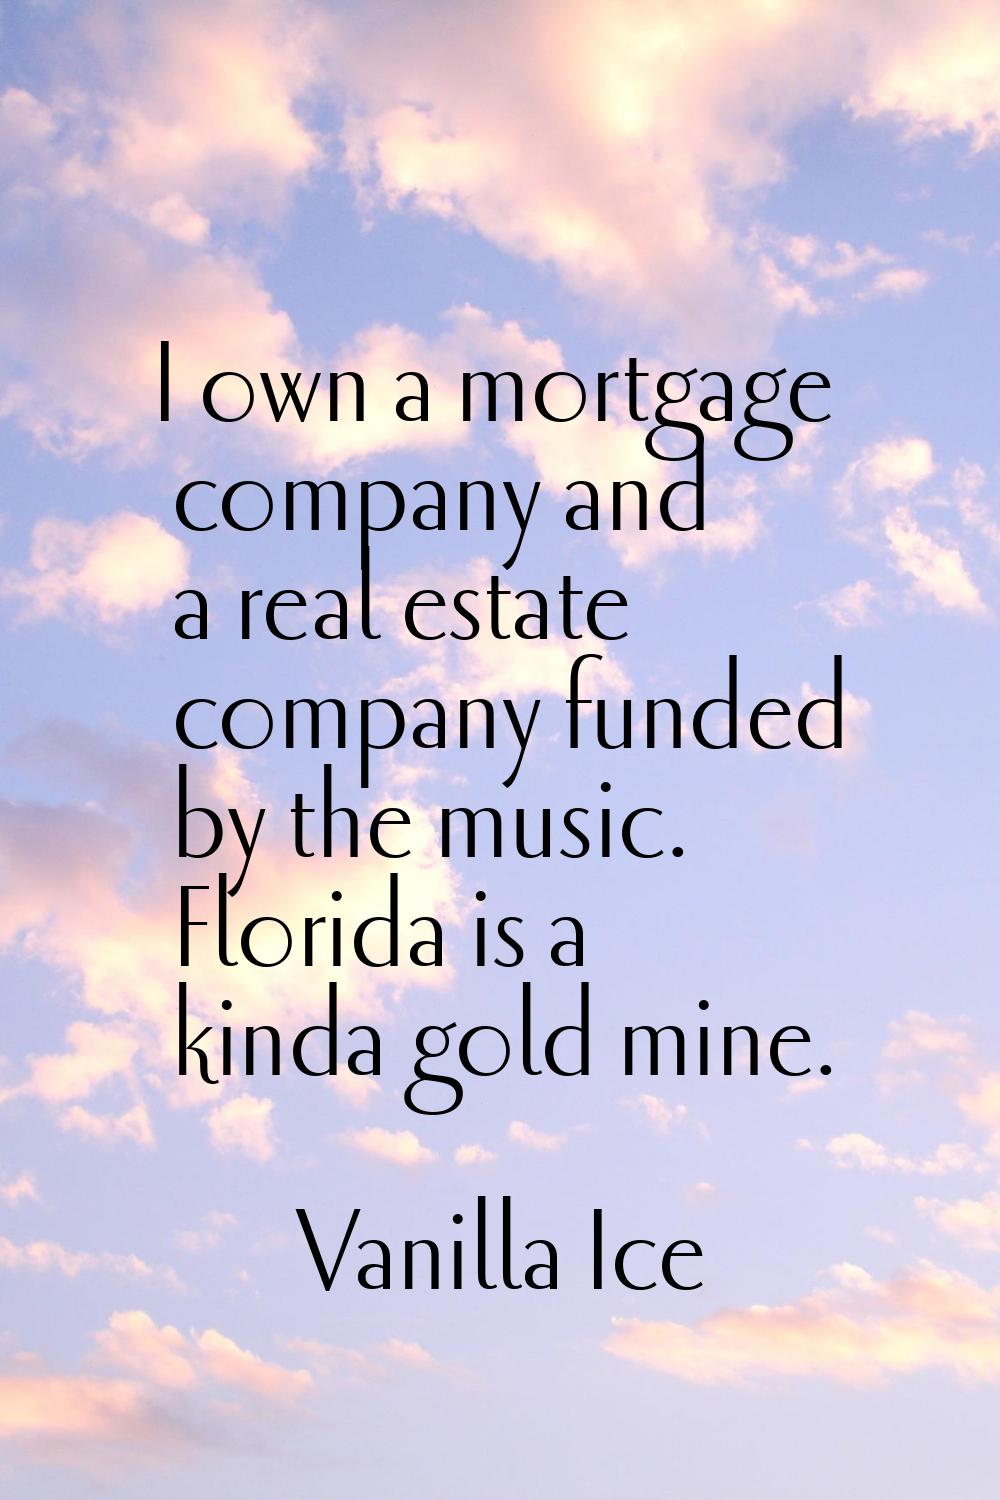 I own a mortgage company and a real estate company funded by the music. Florida is a kinda gold min